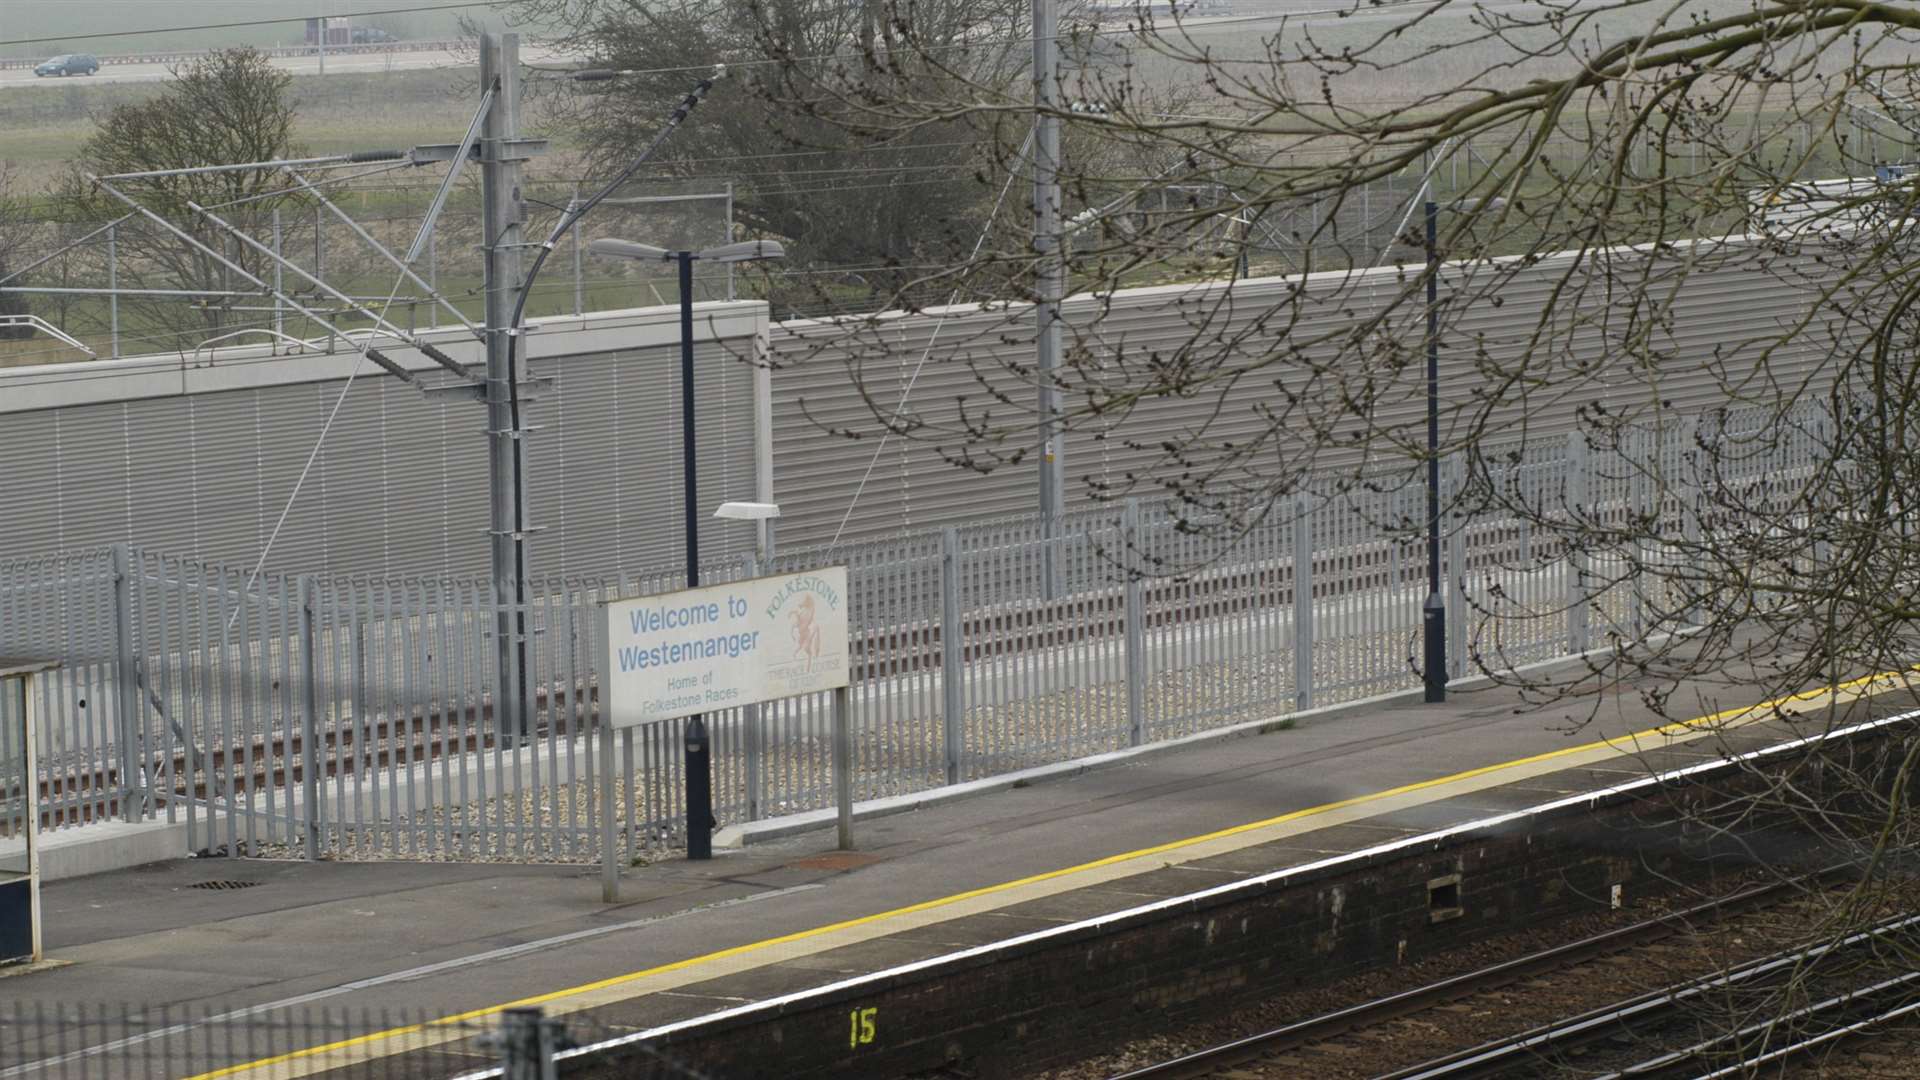 Shepway District Council wants Westenhanger station to become a regular high speed rail stop to service Otterpool Park